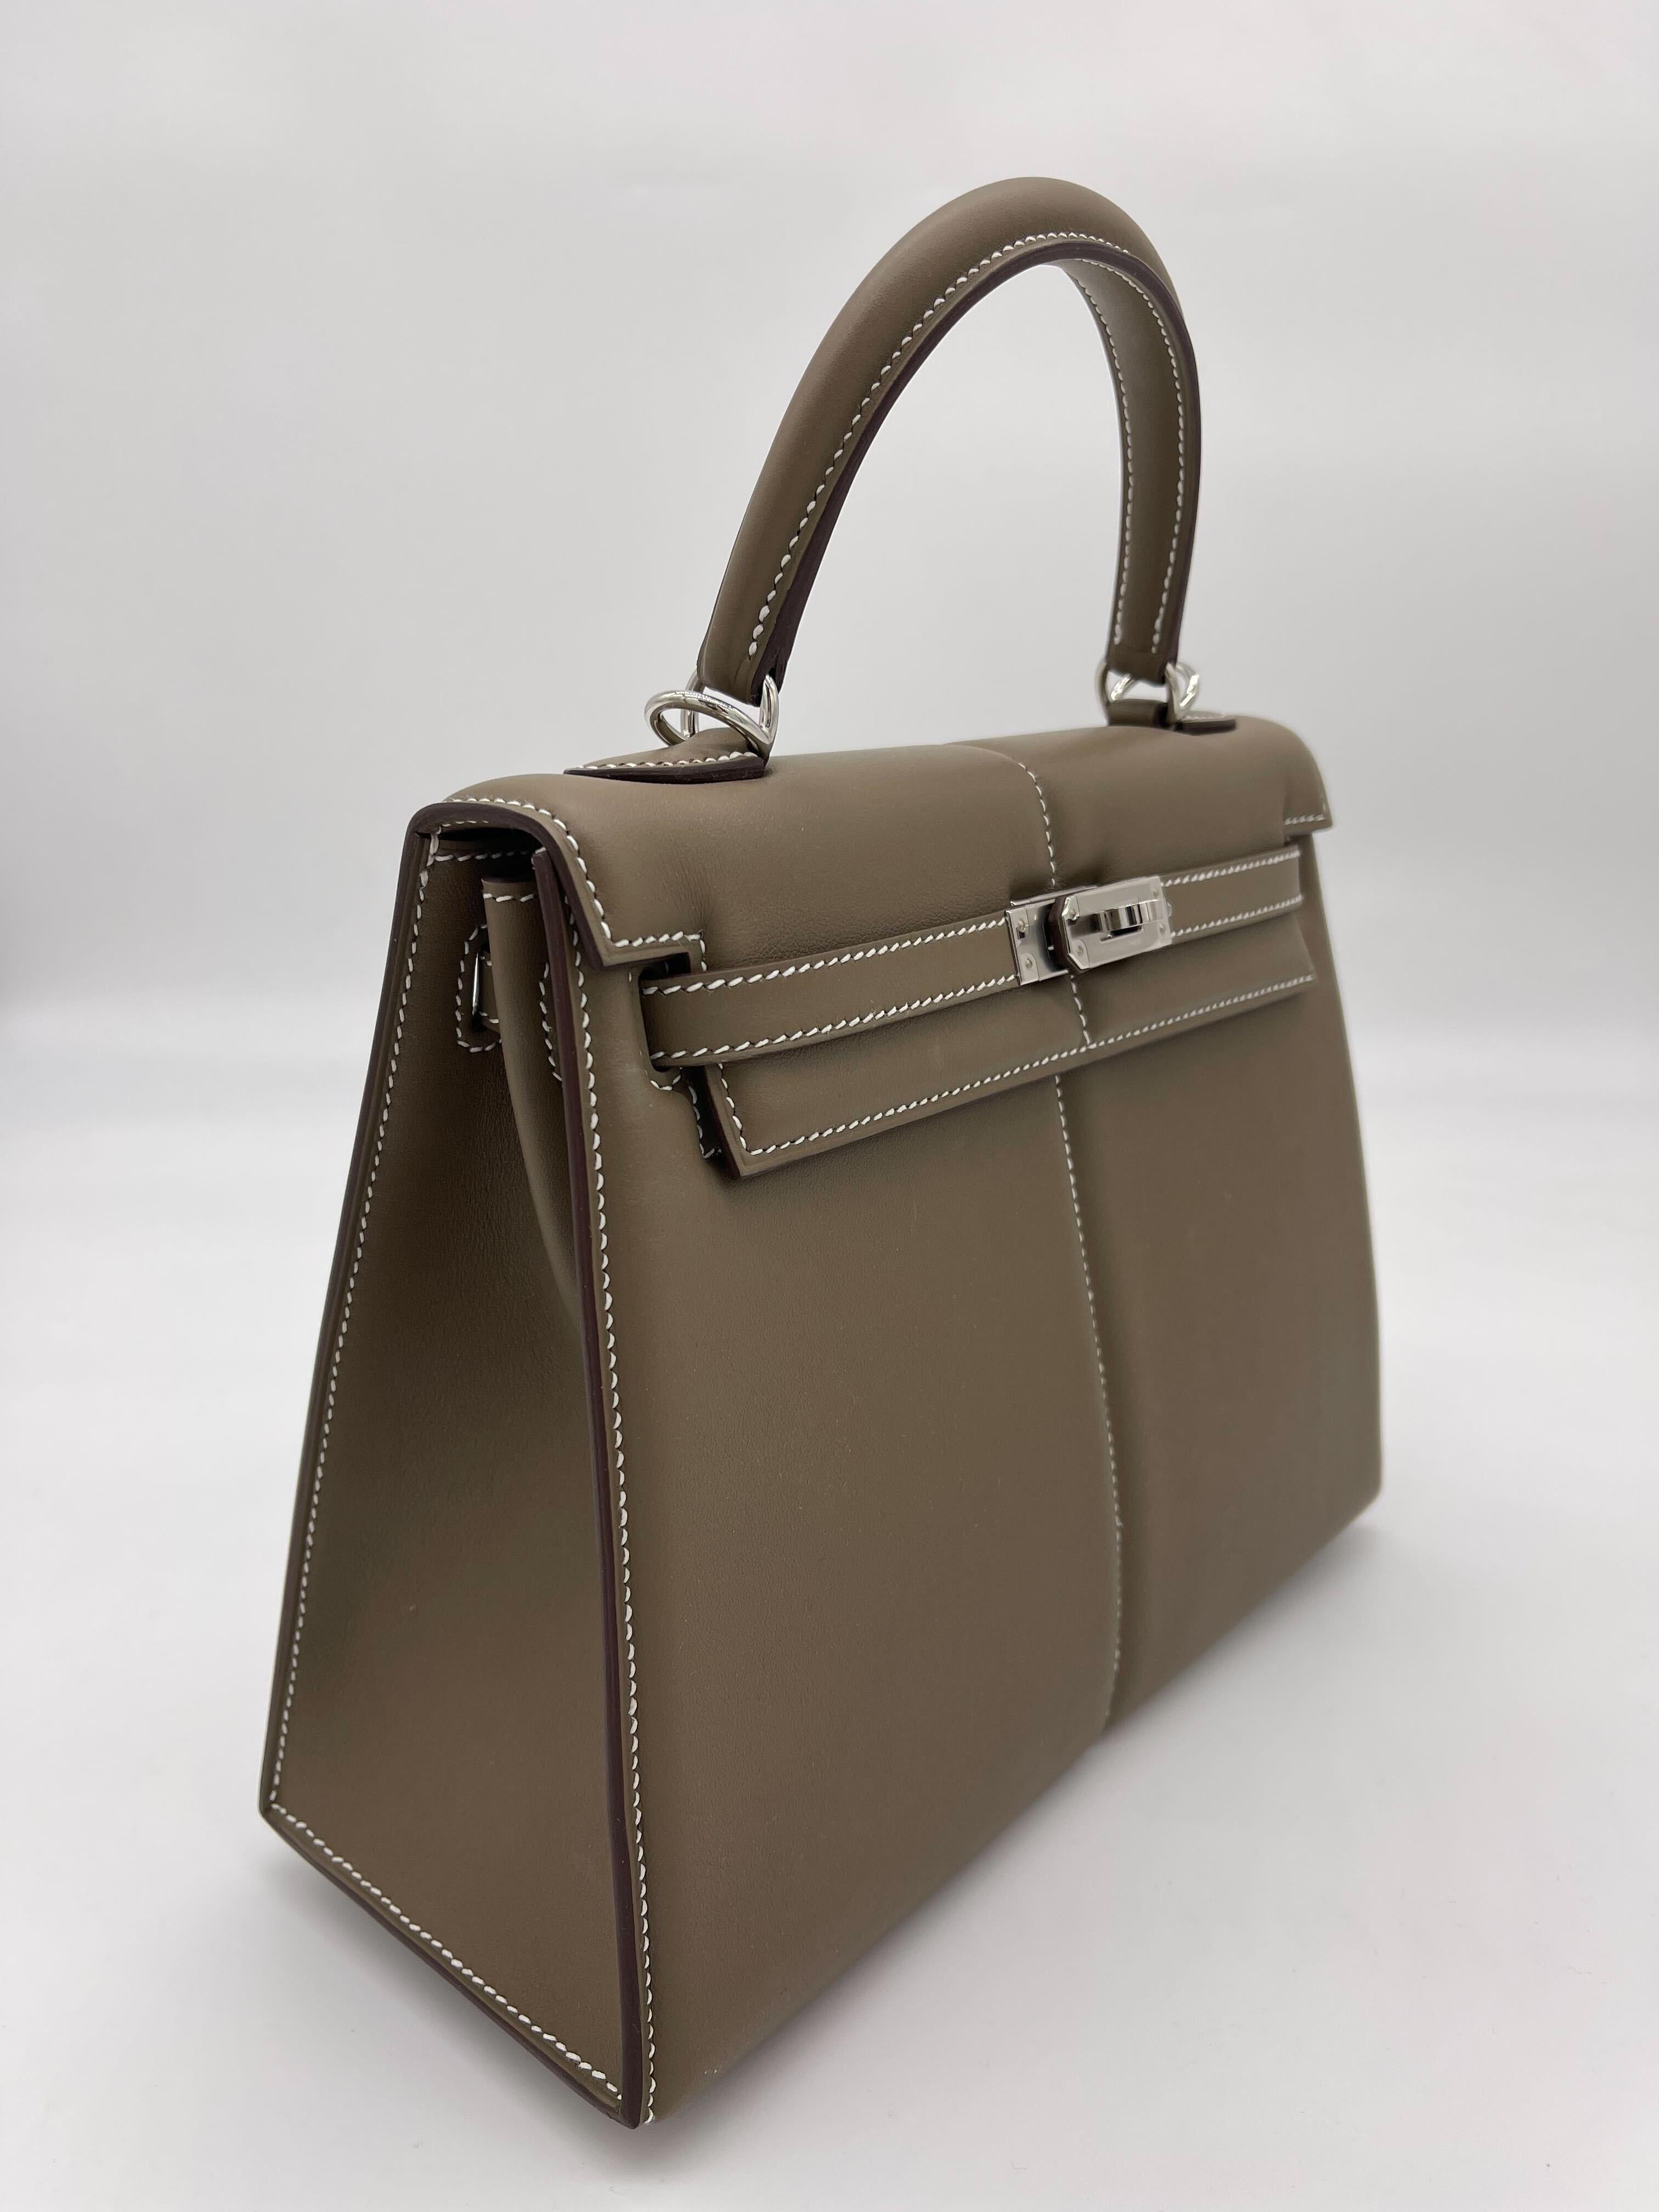 Hermes Kelly 25 Etoupe Swift Padded Palladium Hardware

Condition: Pre-owned (like new)
Material: Swift Padded Leather
Measurements: 25cm x 18cm x 10 cm
Hardware: Palladium

*Comes with original box and dust bag.